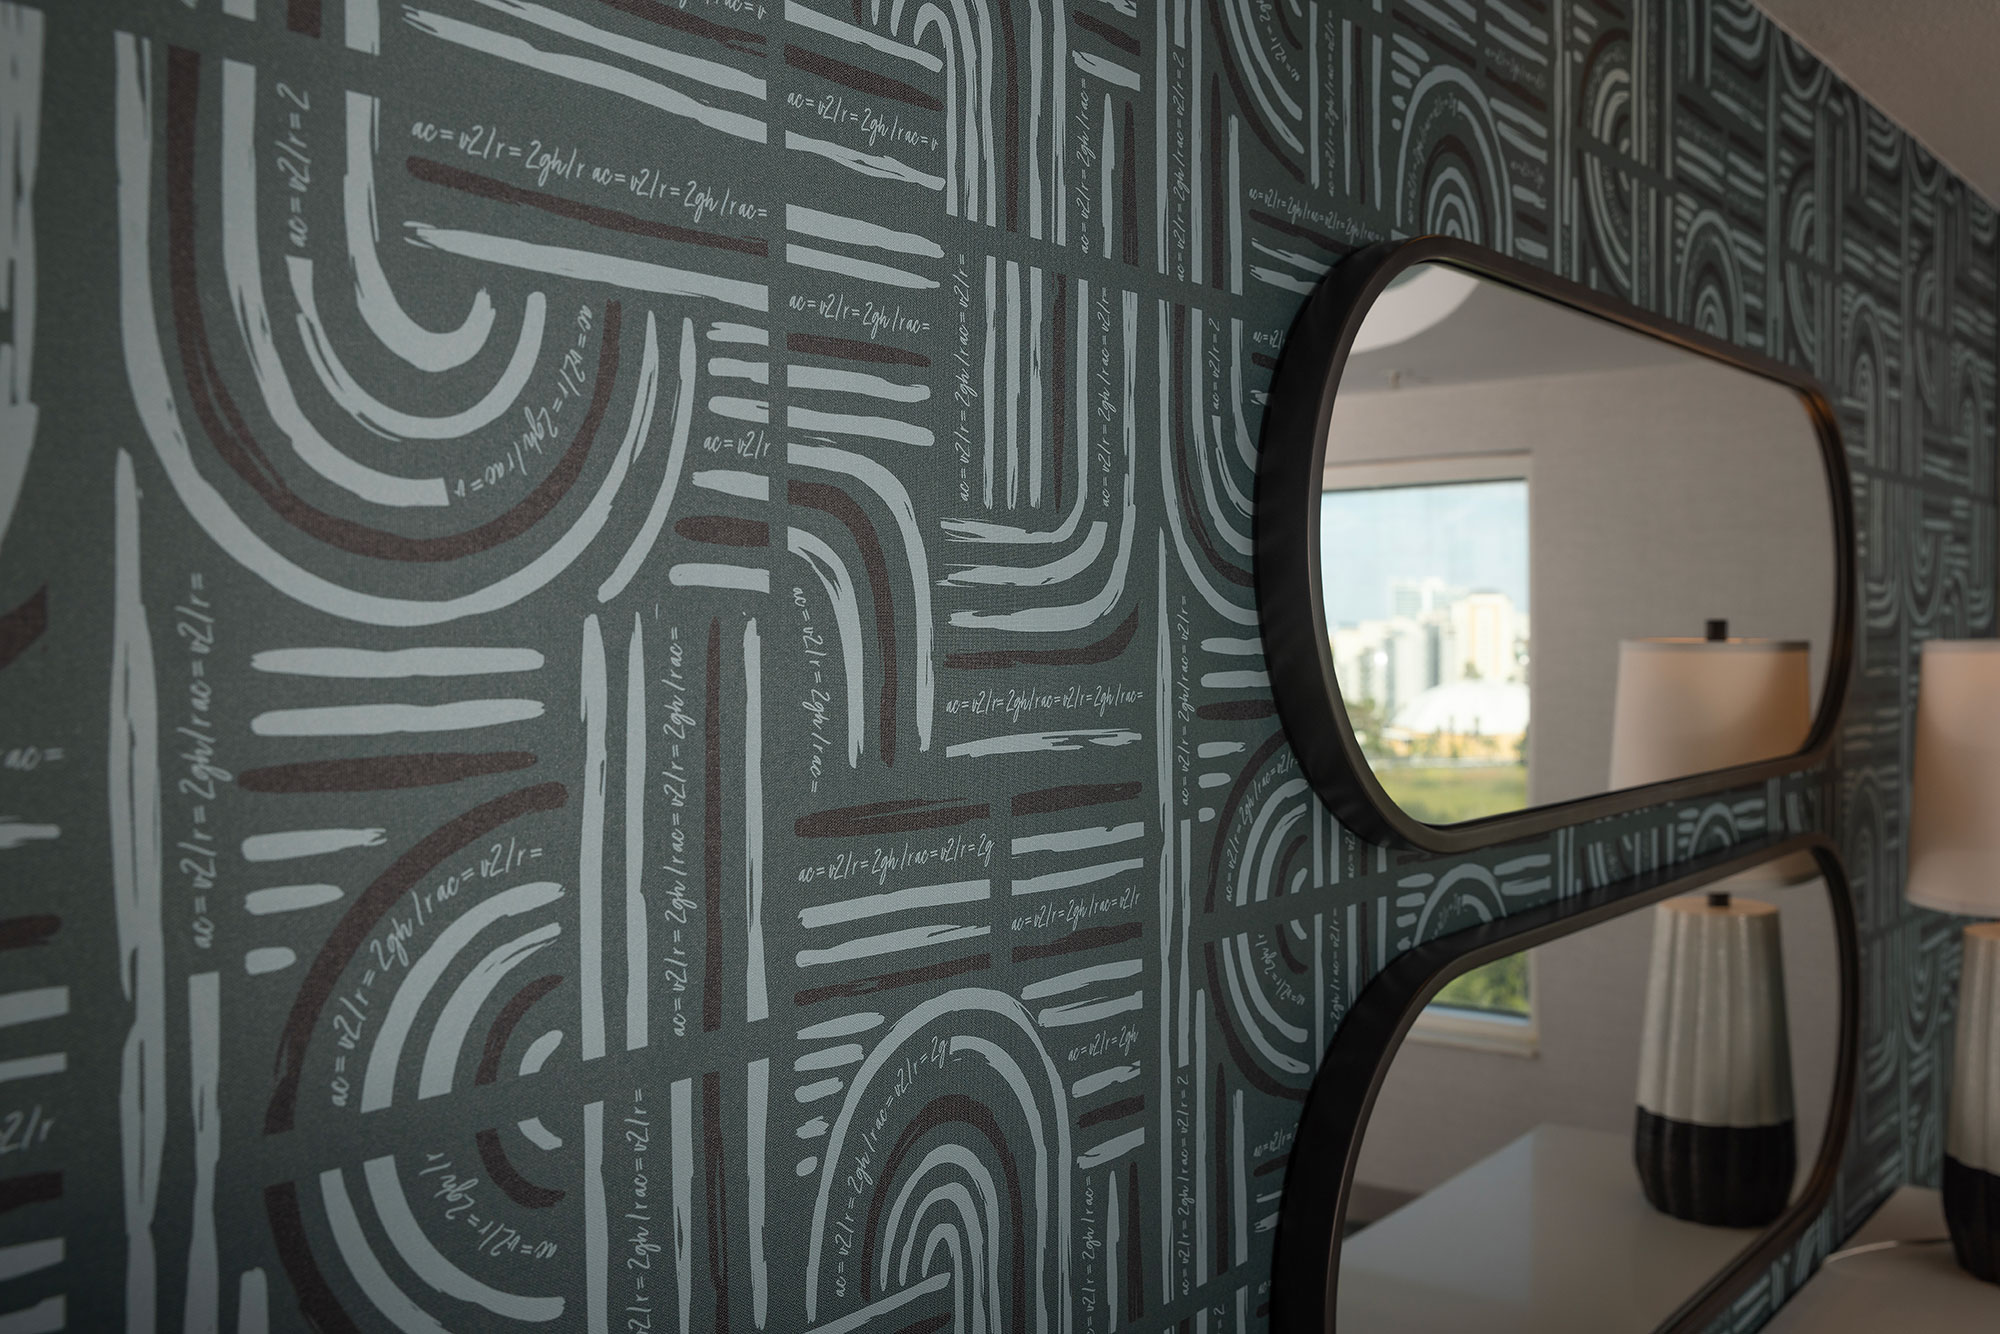 The textured/graphic wallpaper with mirrors on it